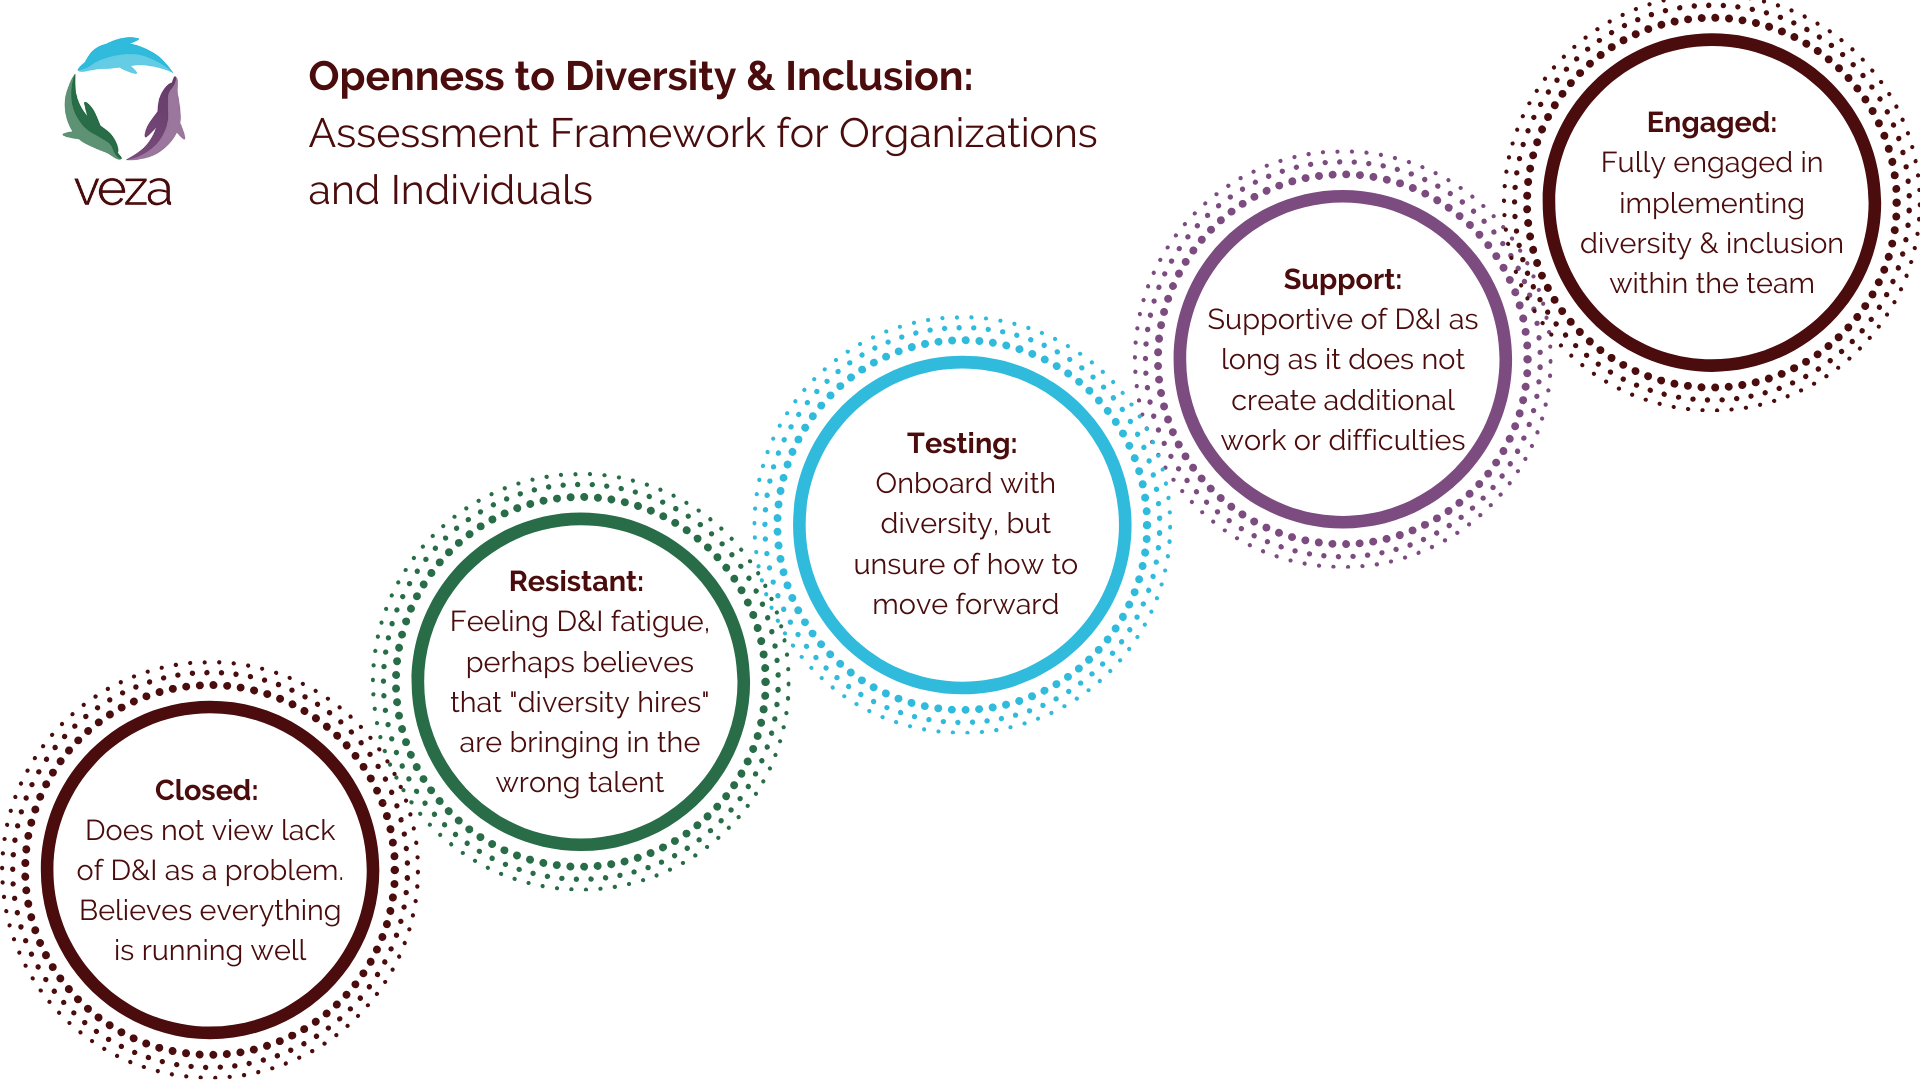 Openness to Equity, Diversity and Inclusion Model